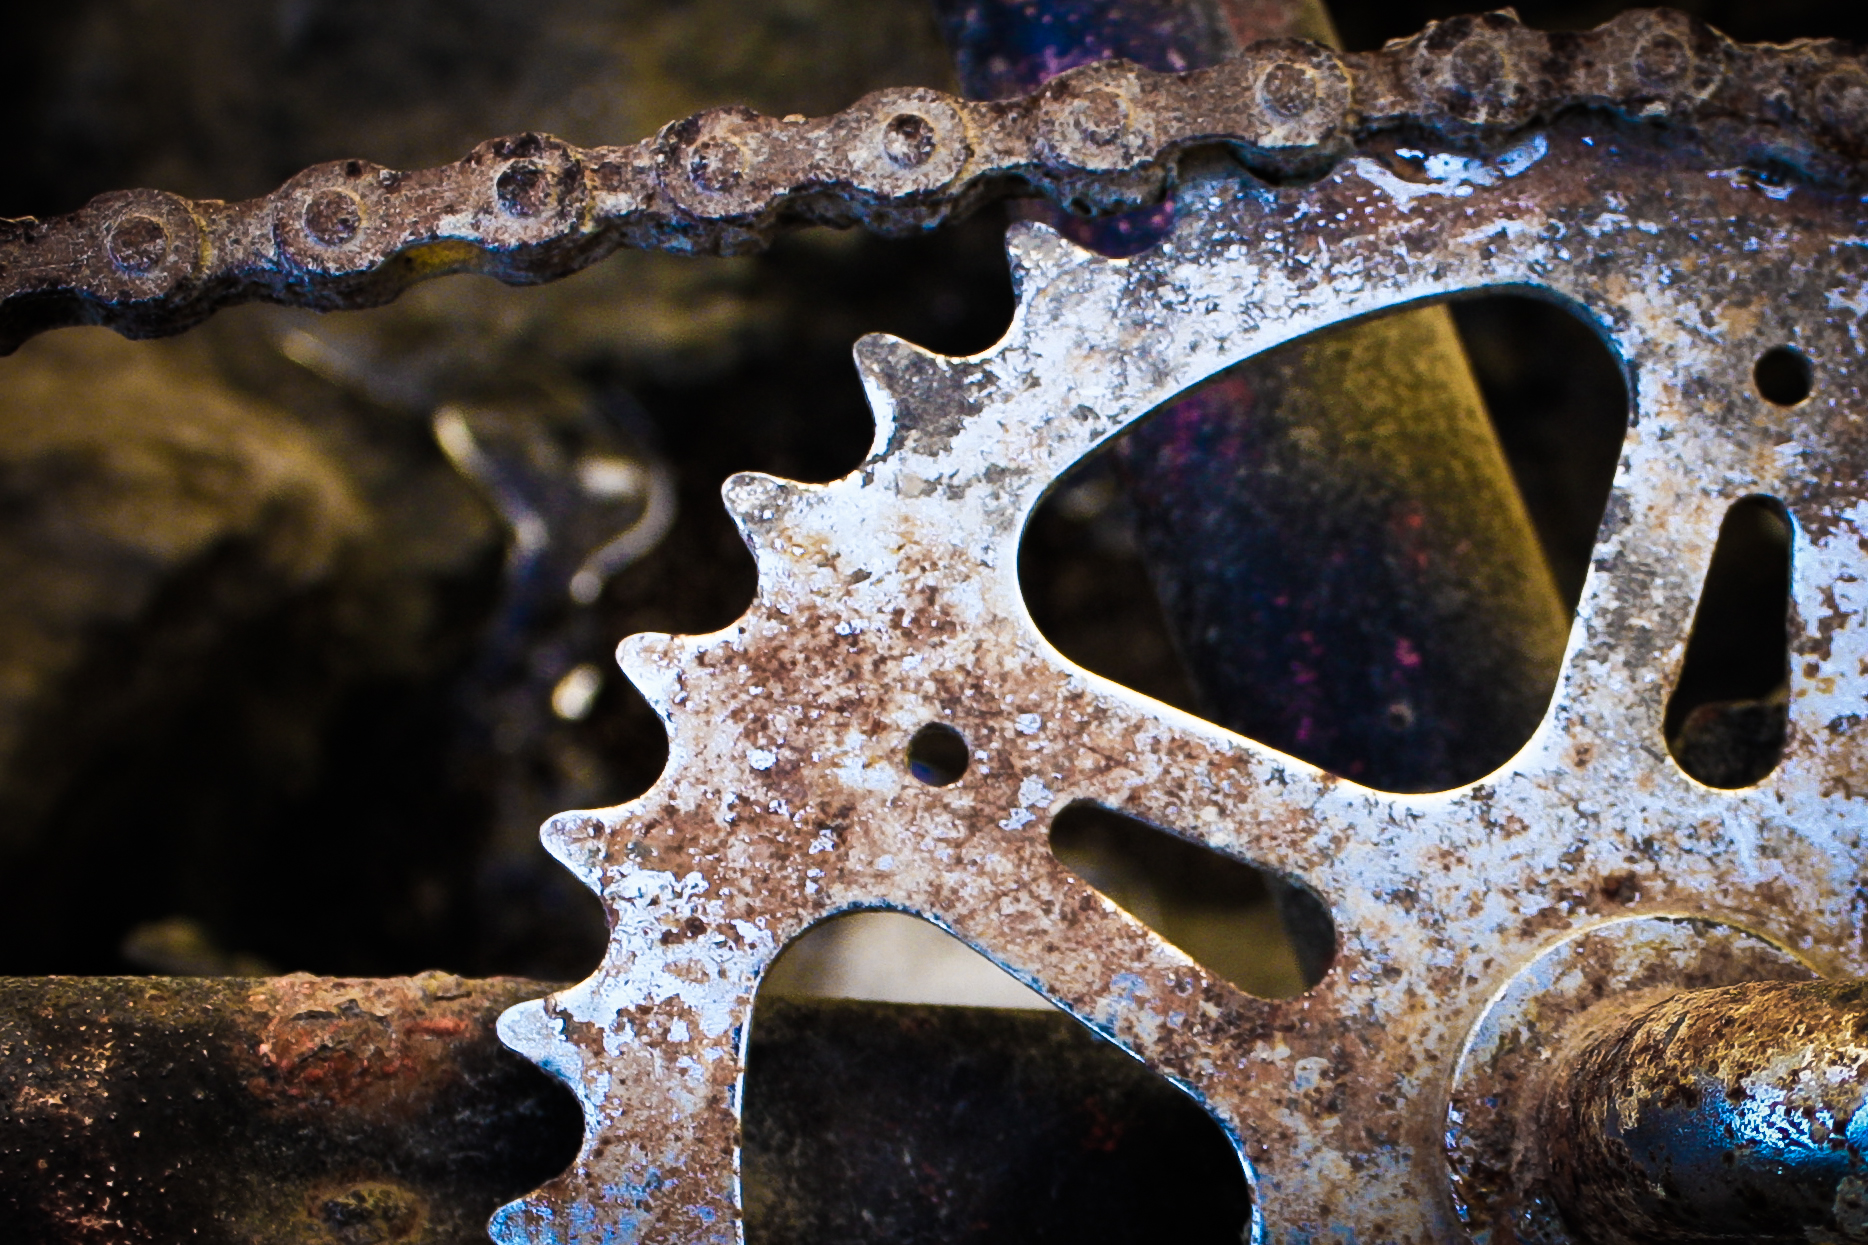 close up of an old bicycle gear, with rusted parts